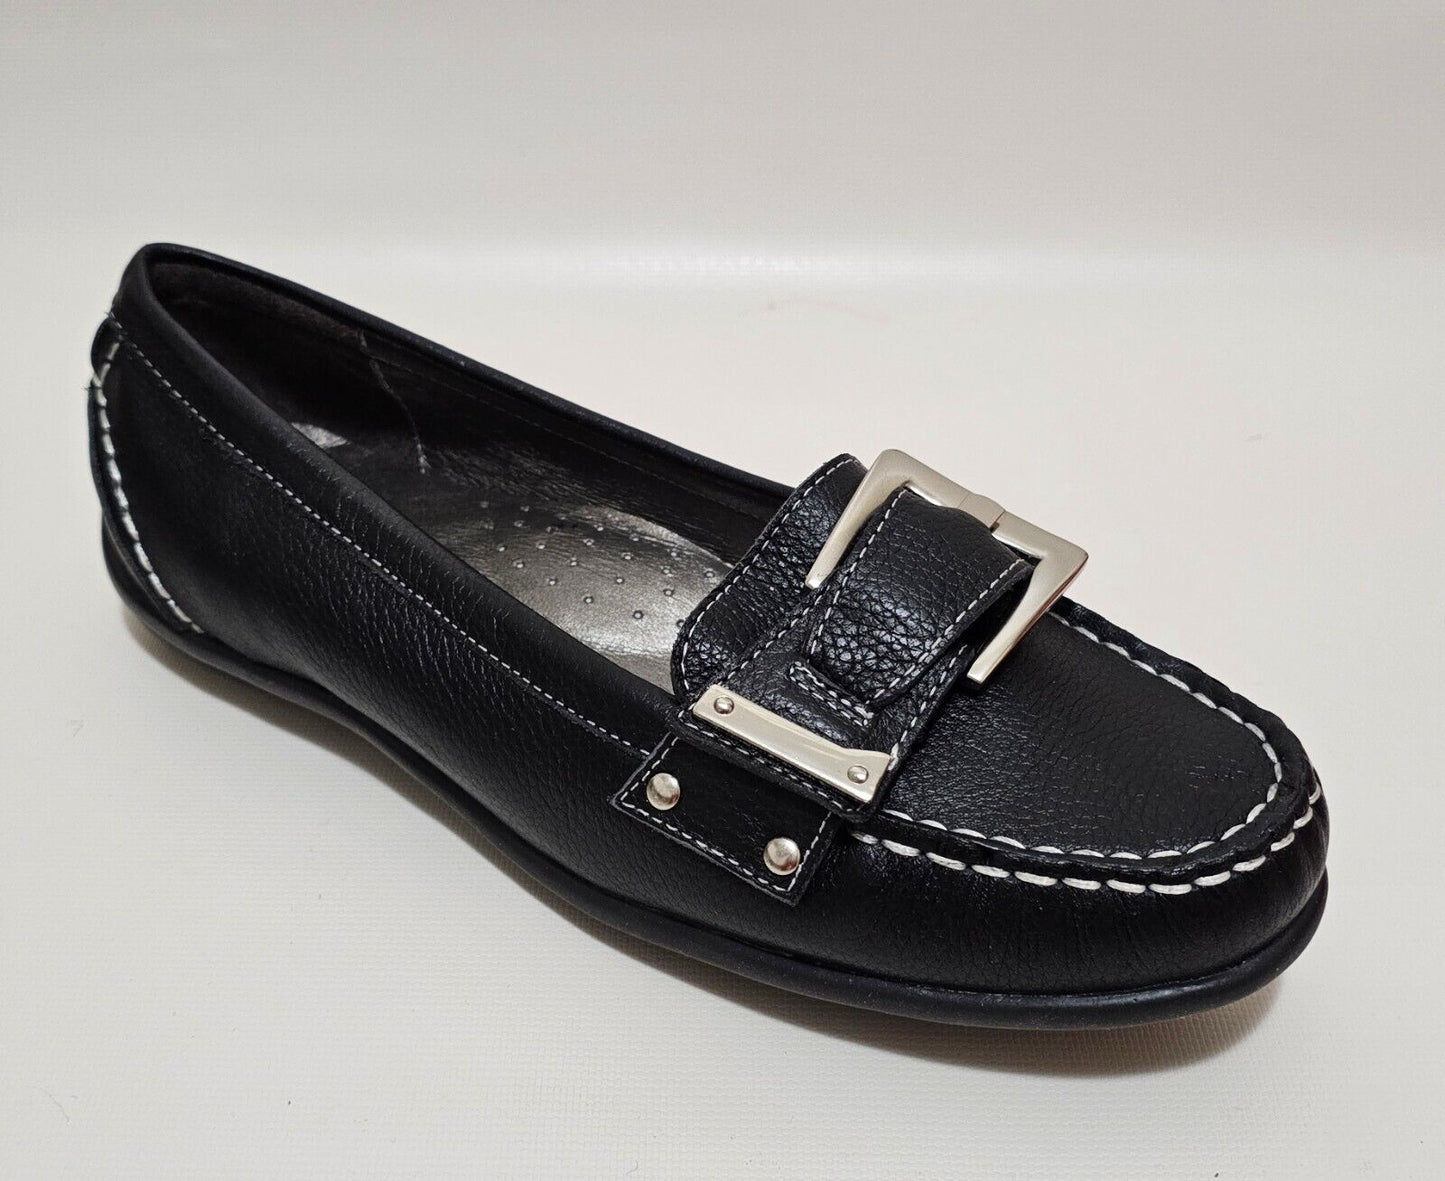 Renalison Black Leather Slip-on Casual Loafer Shoes Womens Size US 7